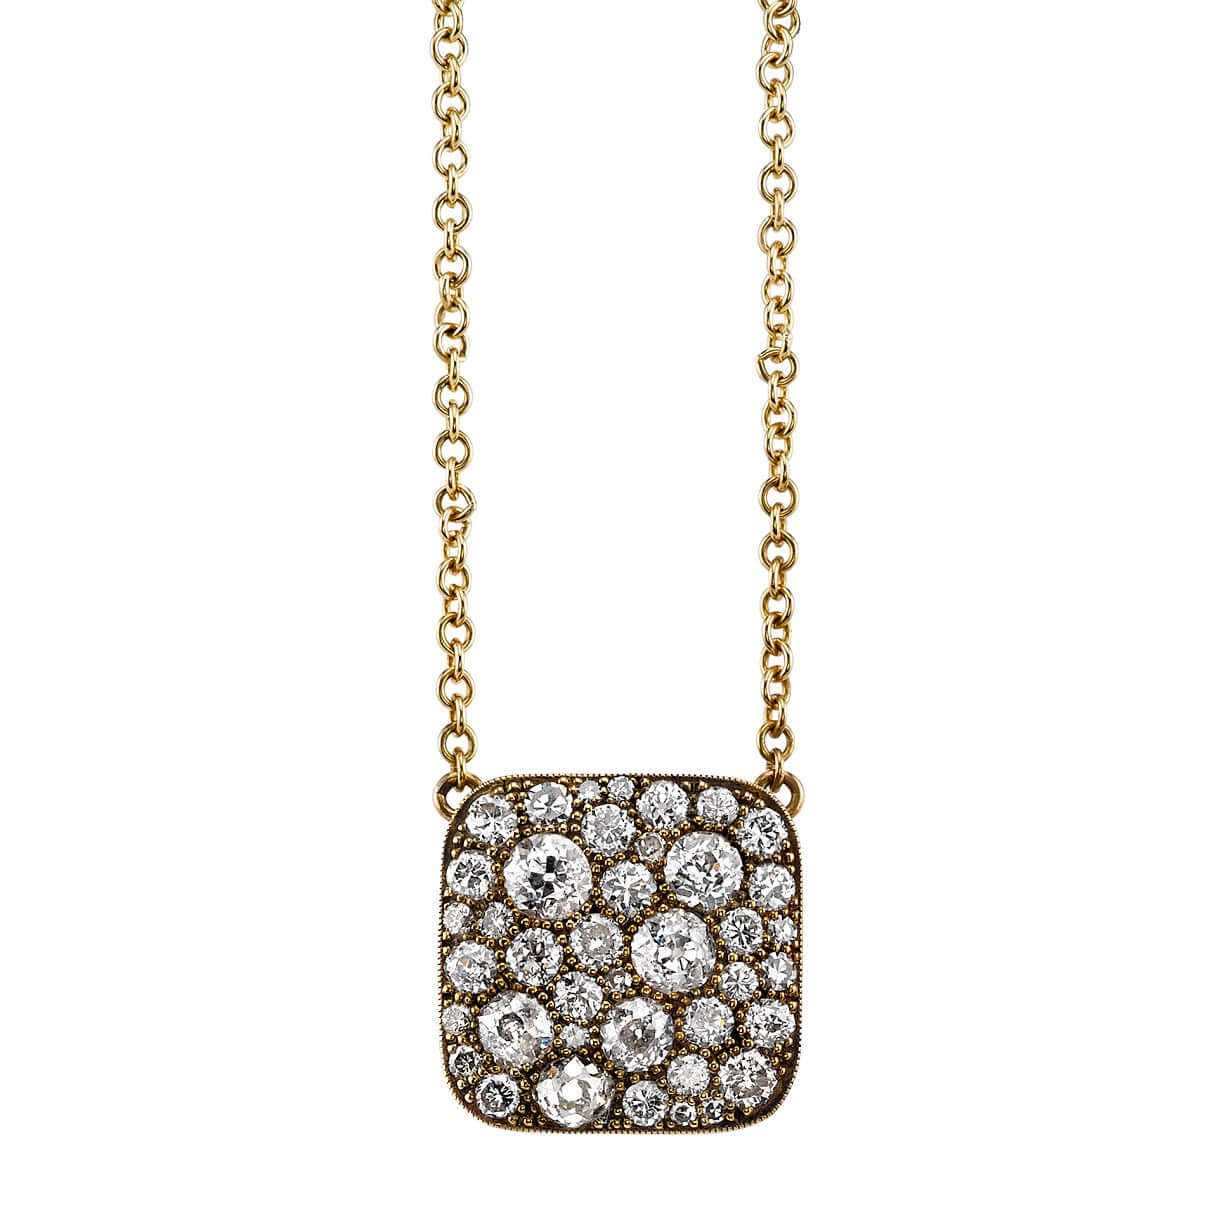 SINGLE STONE SQUARE COBBLESTONE PENDANT NECKLACE featuring Approximately 2.00ctw various old cut and round brilliant cut diamonds set in a handcrafted 18K yellow gold pendant. Price may vary according to total diamond weight. Available in an oxidized or p